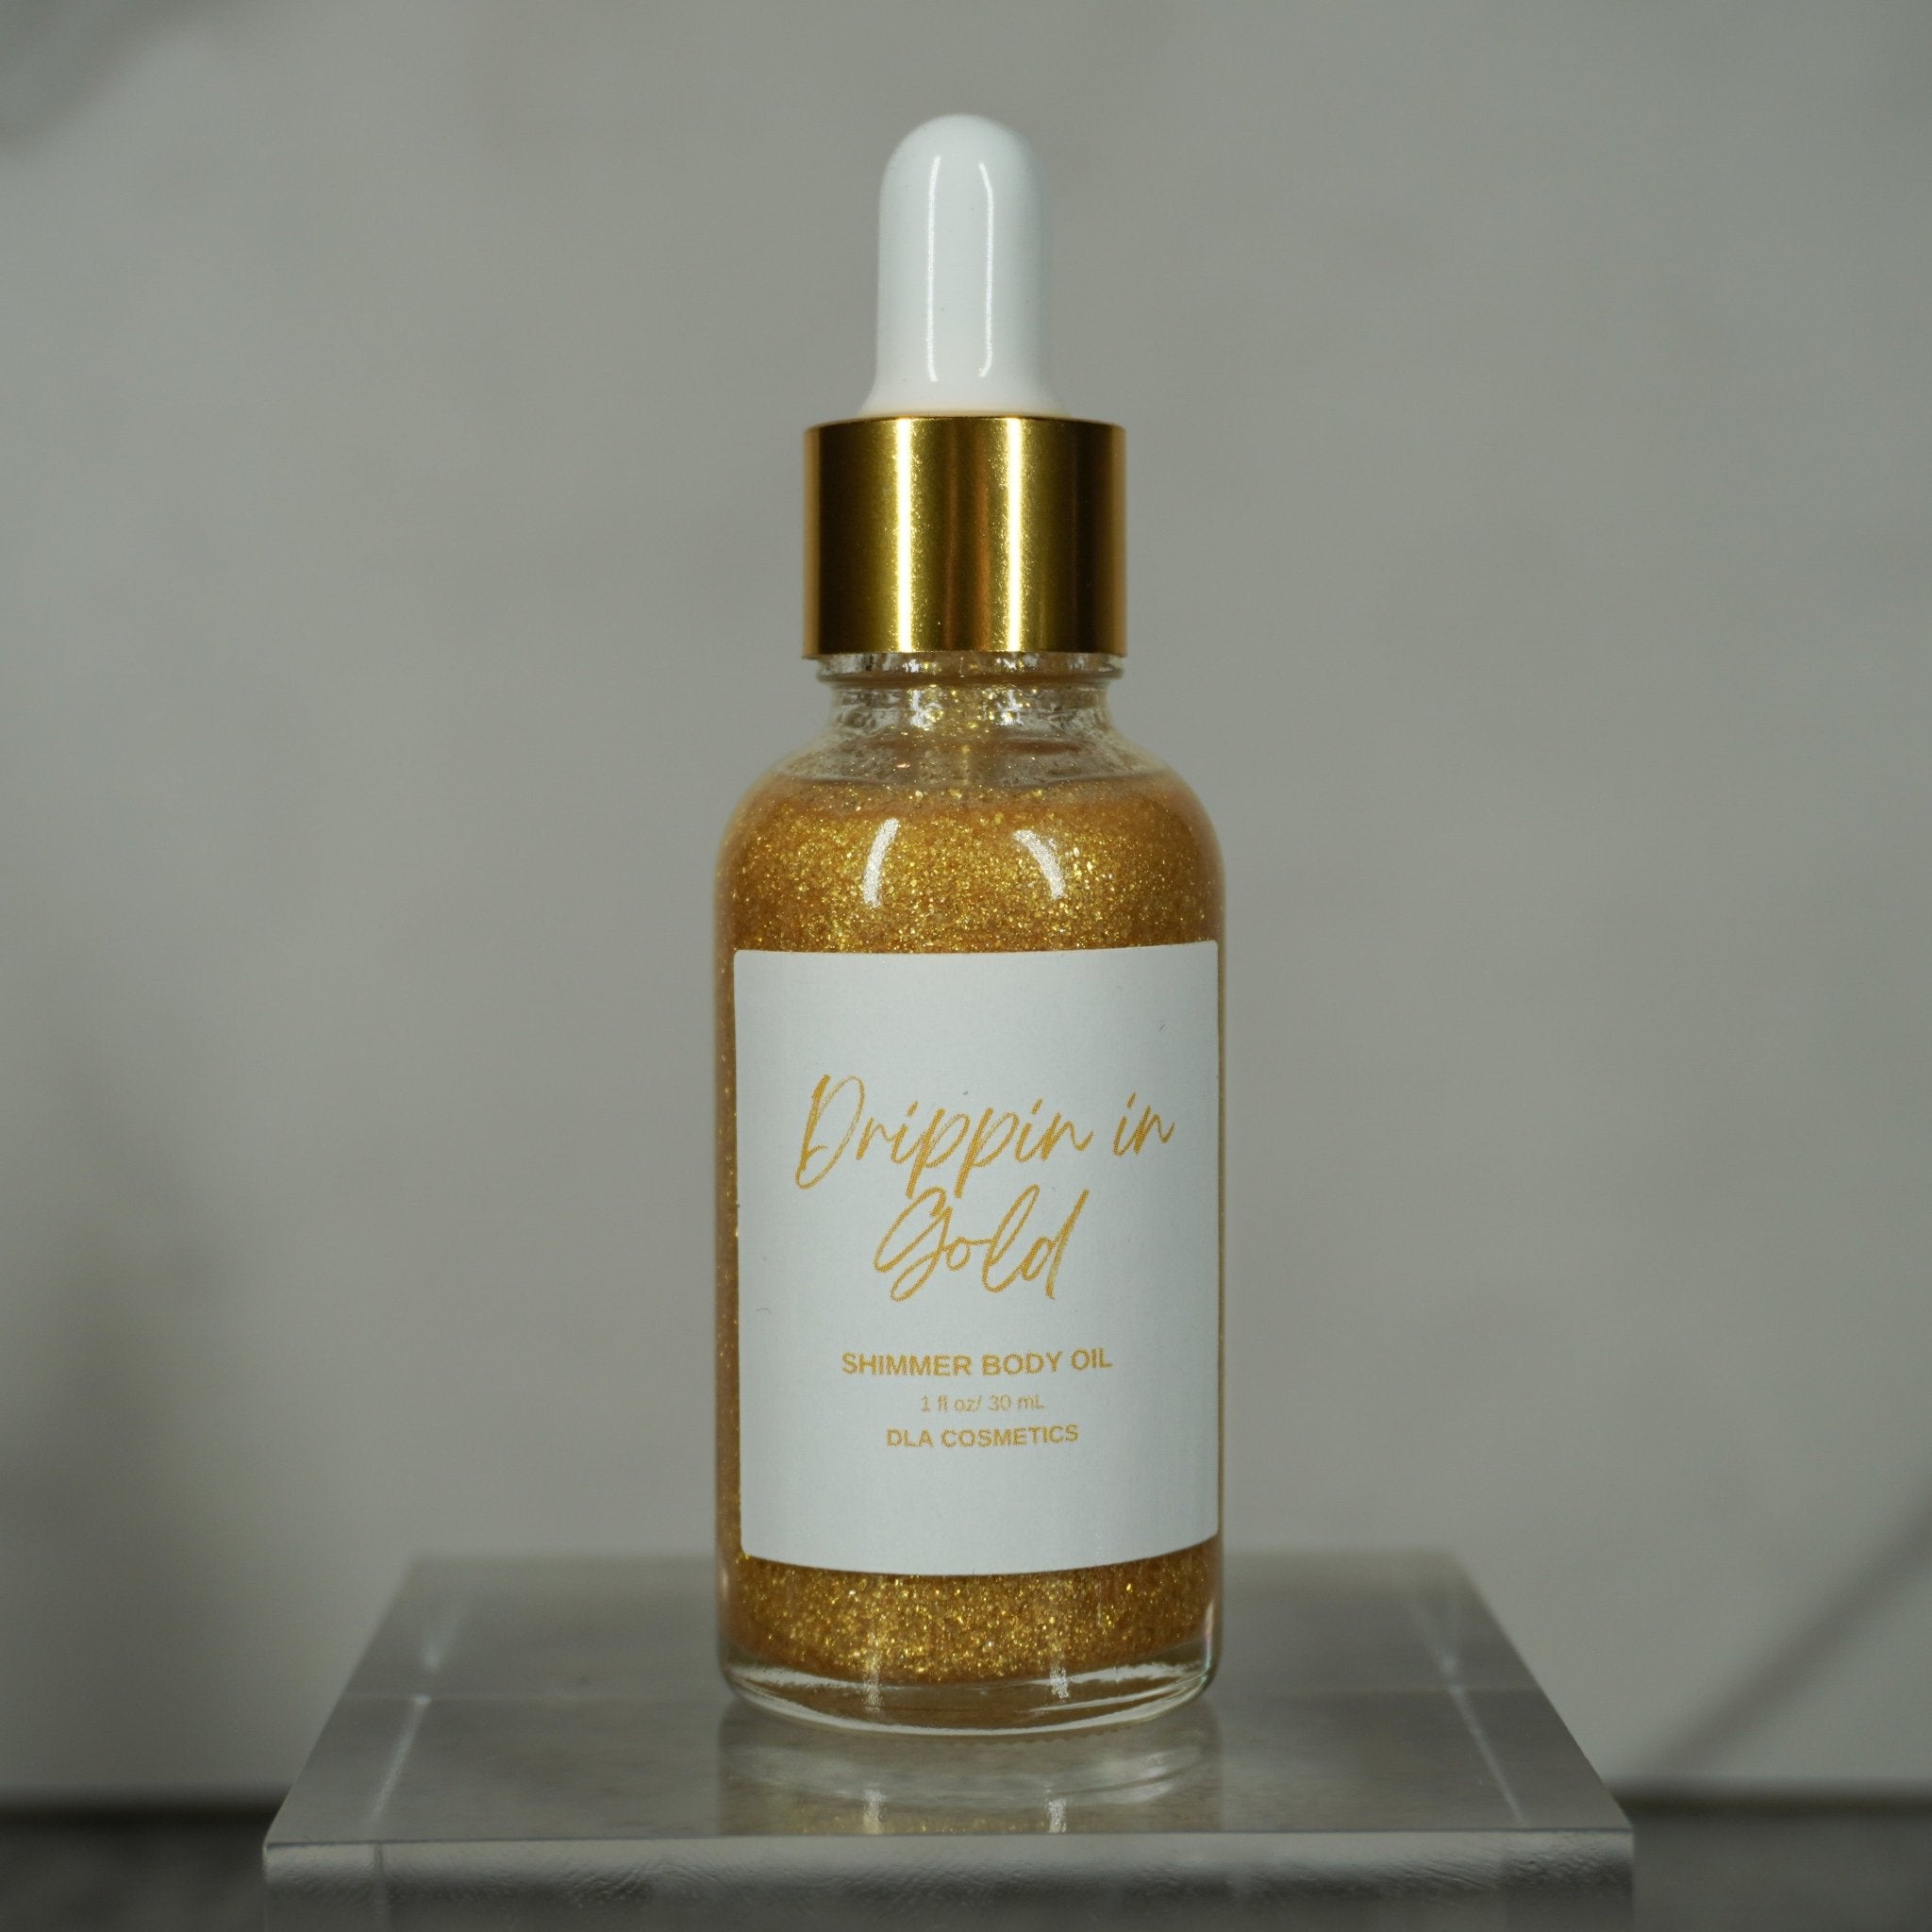 Body & Hair Glitter DRIPPING IN GOLD SHIMMER OIL - DLA Cosmetics-Skin care products online